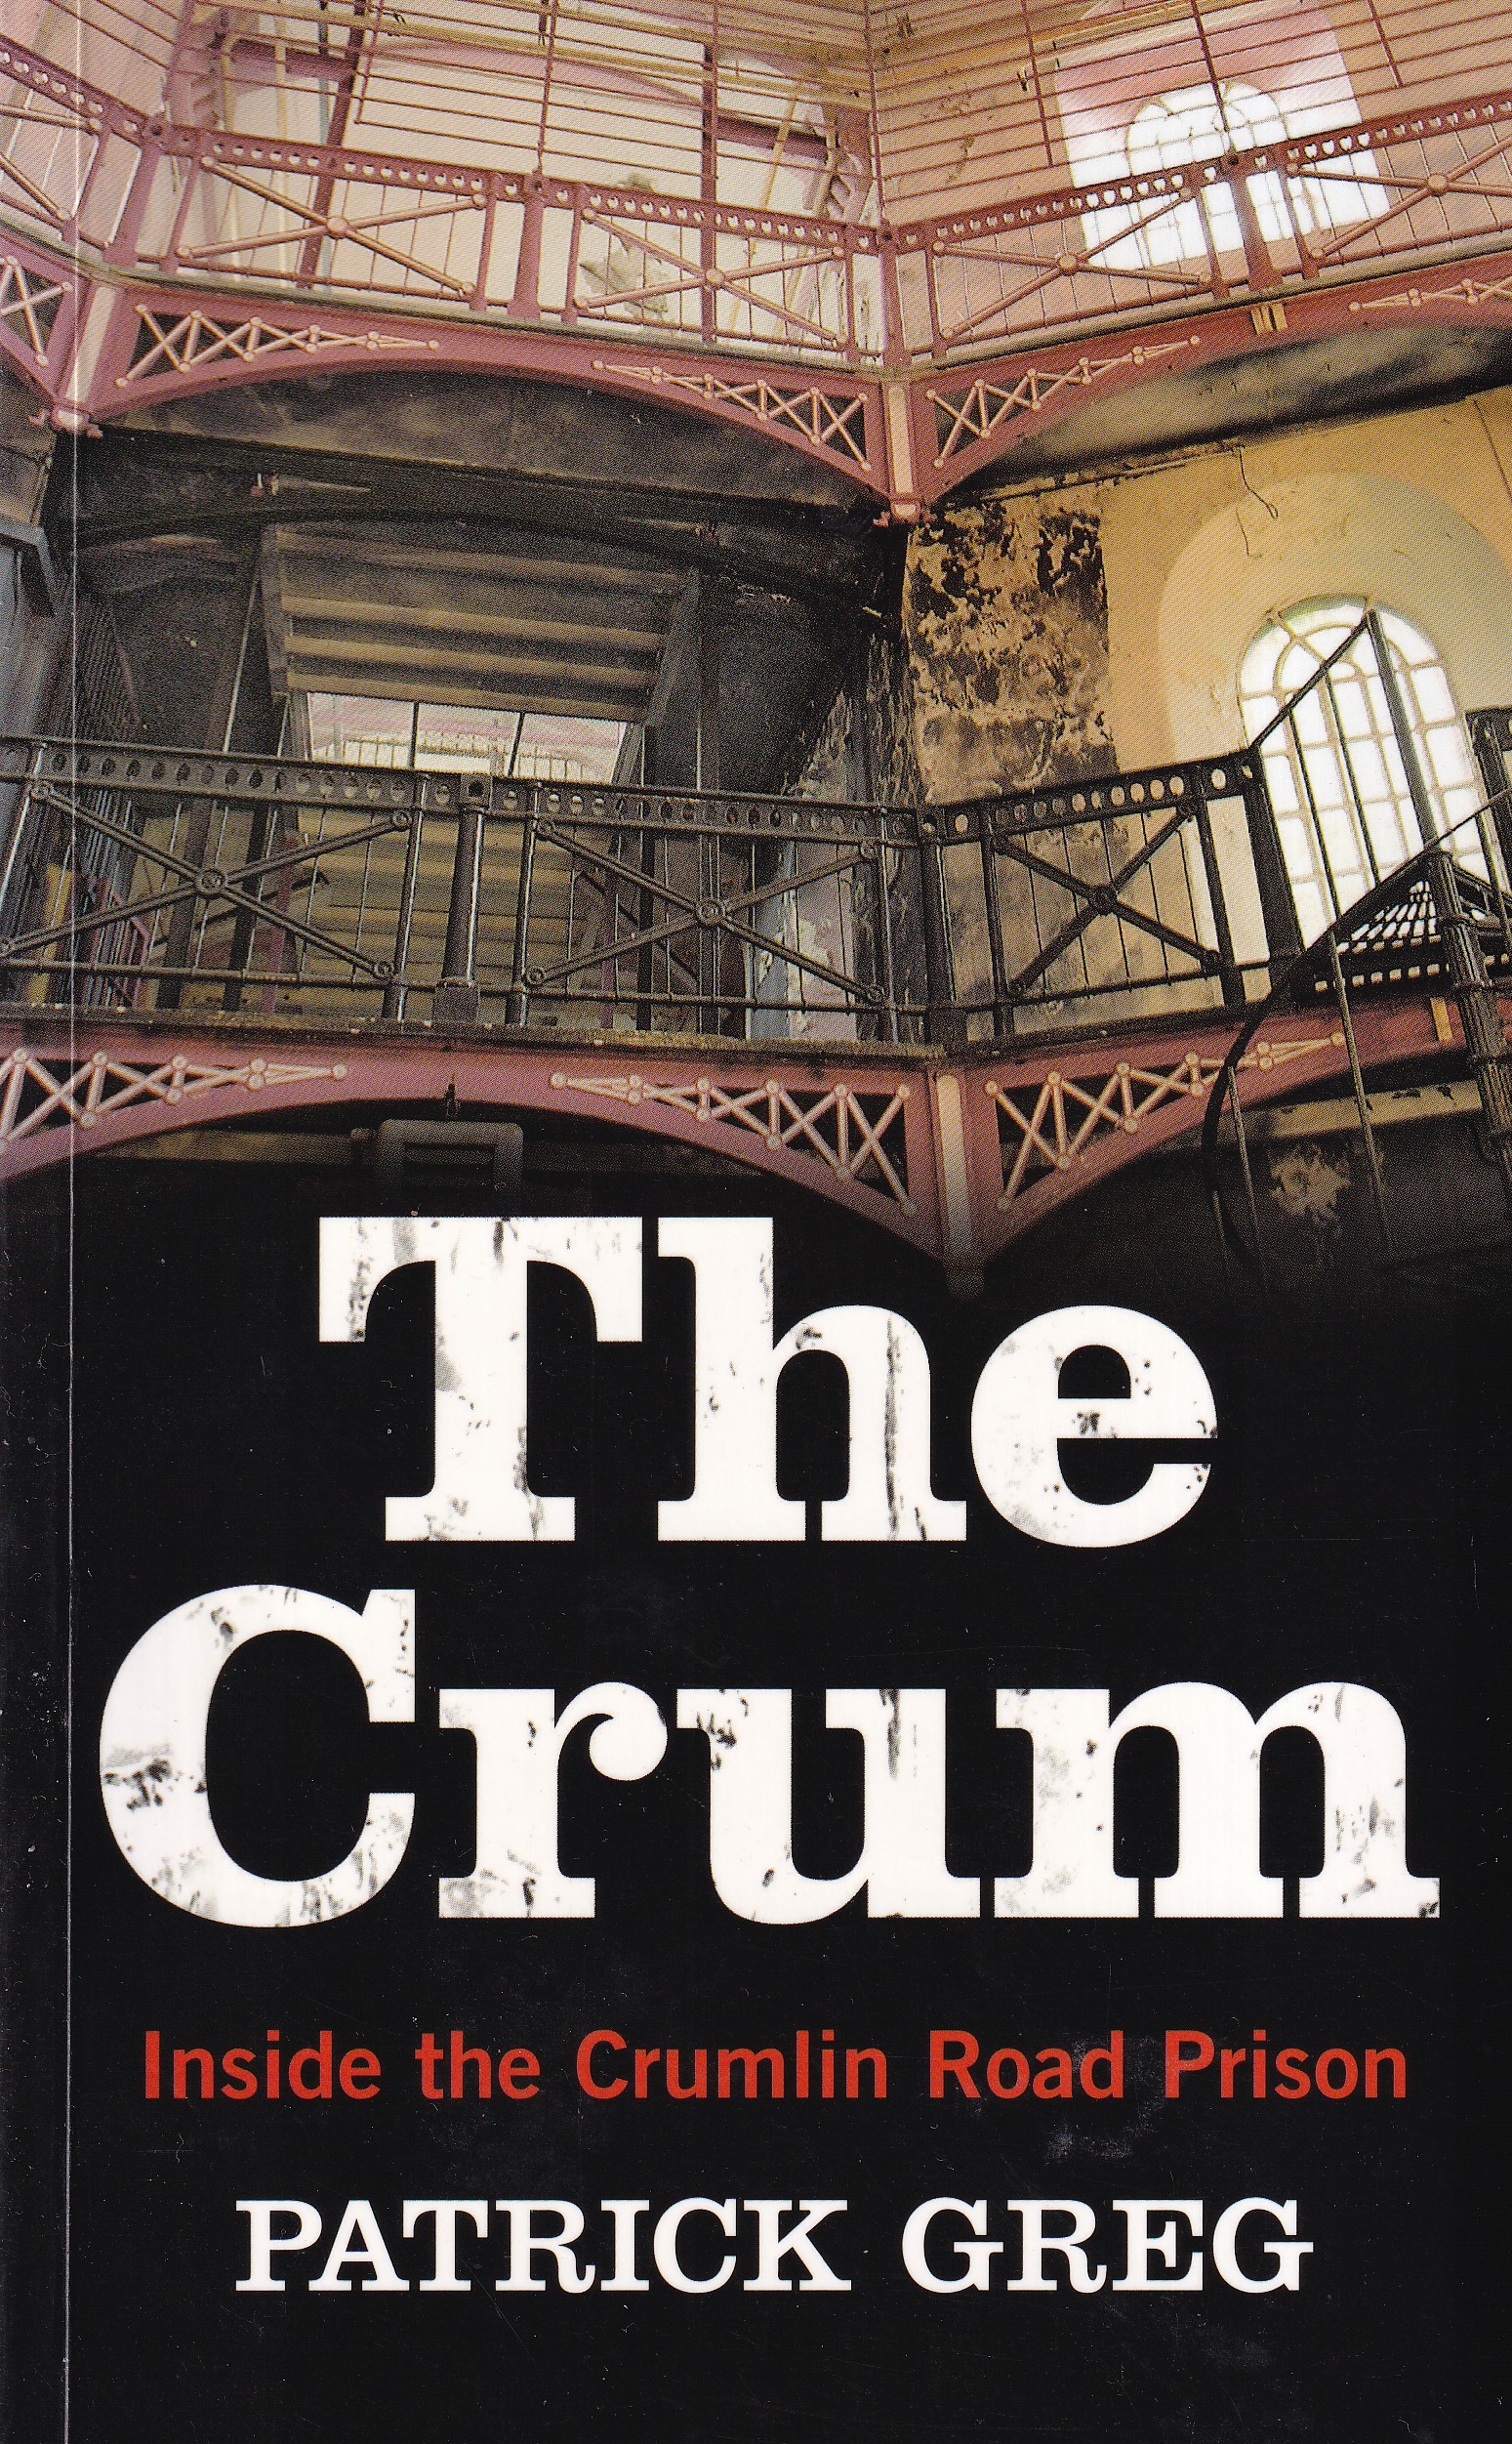 The Crum: Inside the Crumlin Road Prison by Patrick Greg